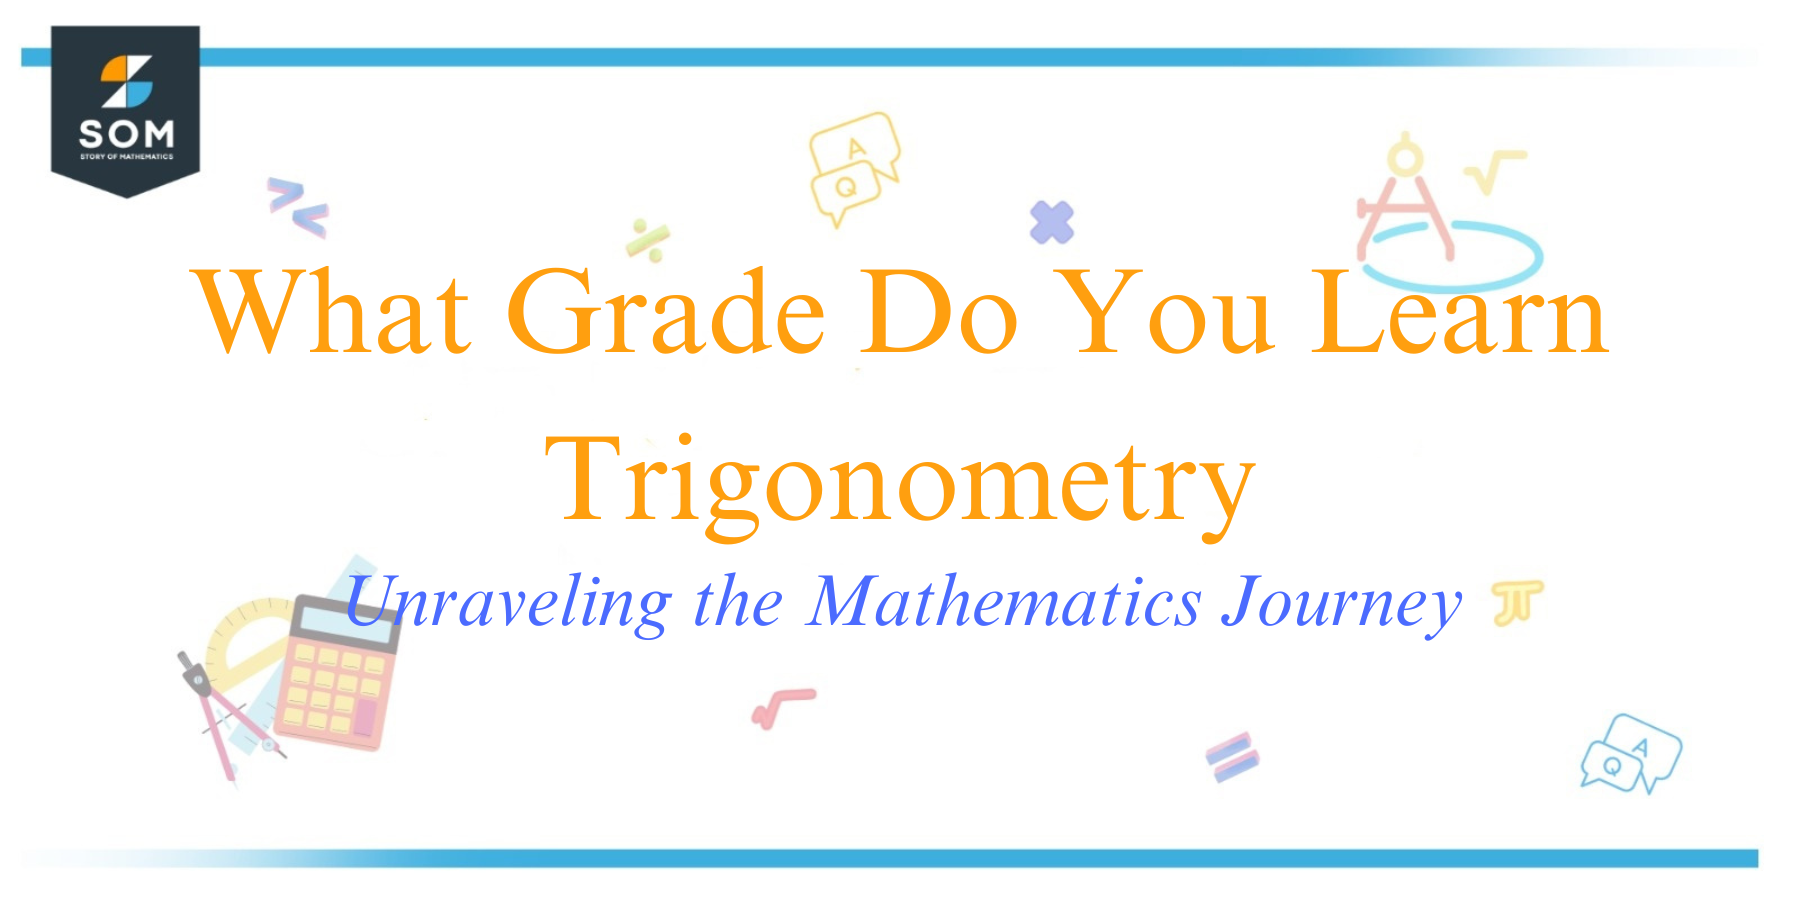 What Grade Do You Learn Trigonometry Unraveling the Mathematics Journey